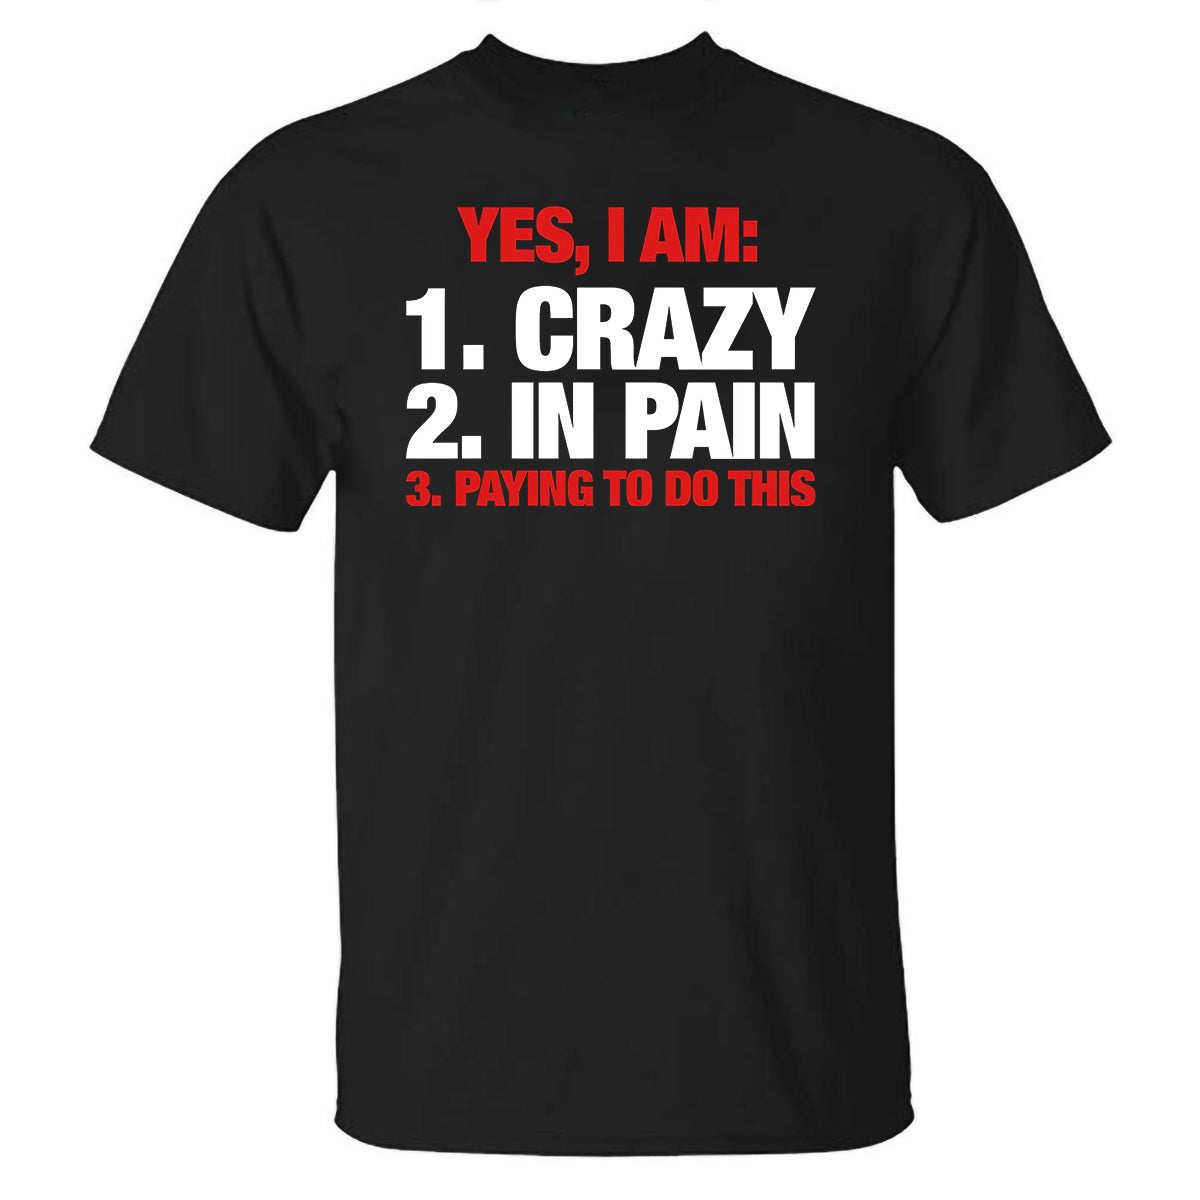 GrootWear Yes, I Am:1. Crazy 2. In Pain 3. Playing To Do This Printed T-shirt